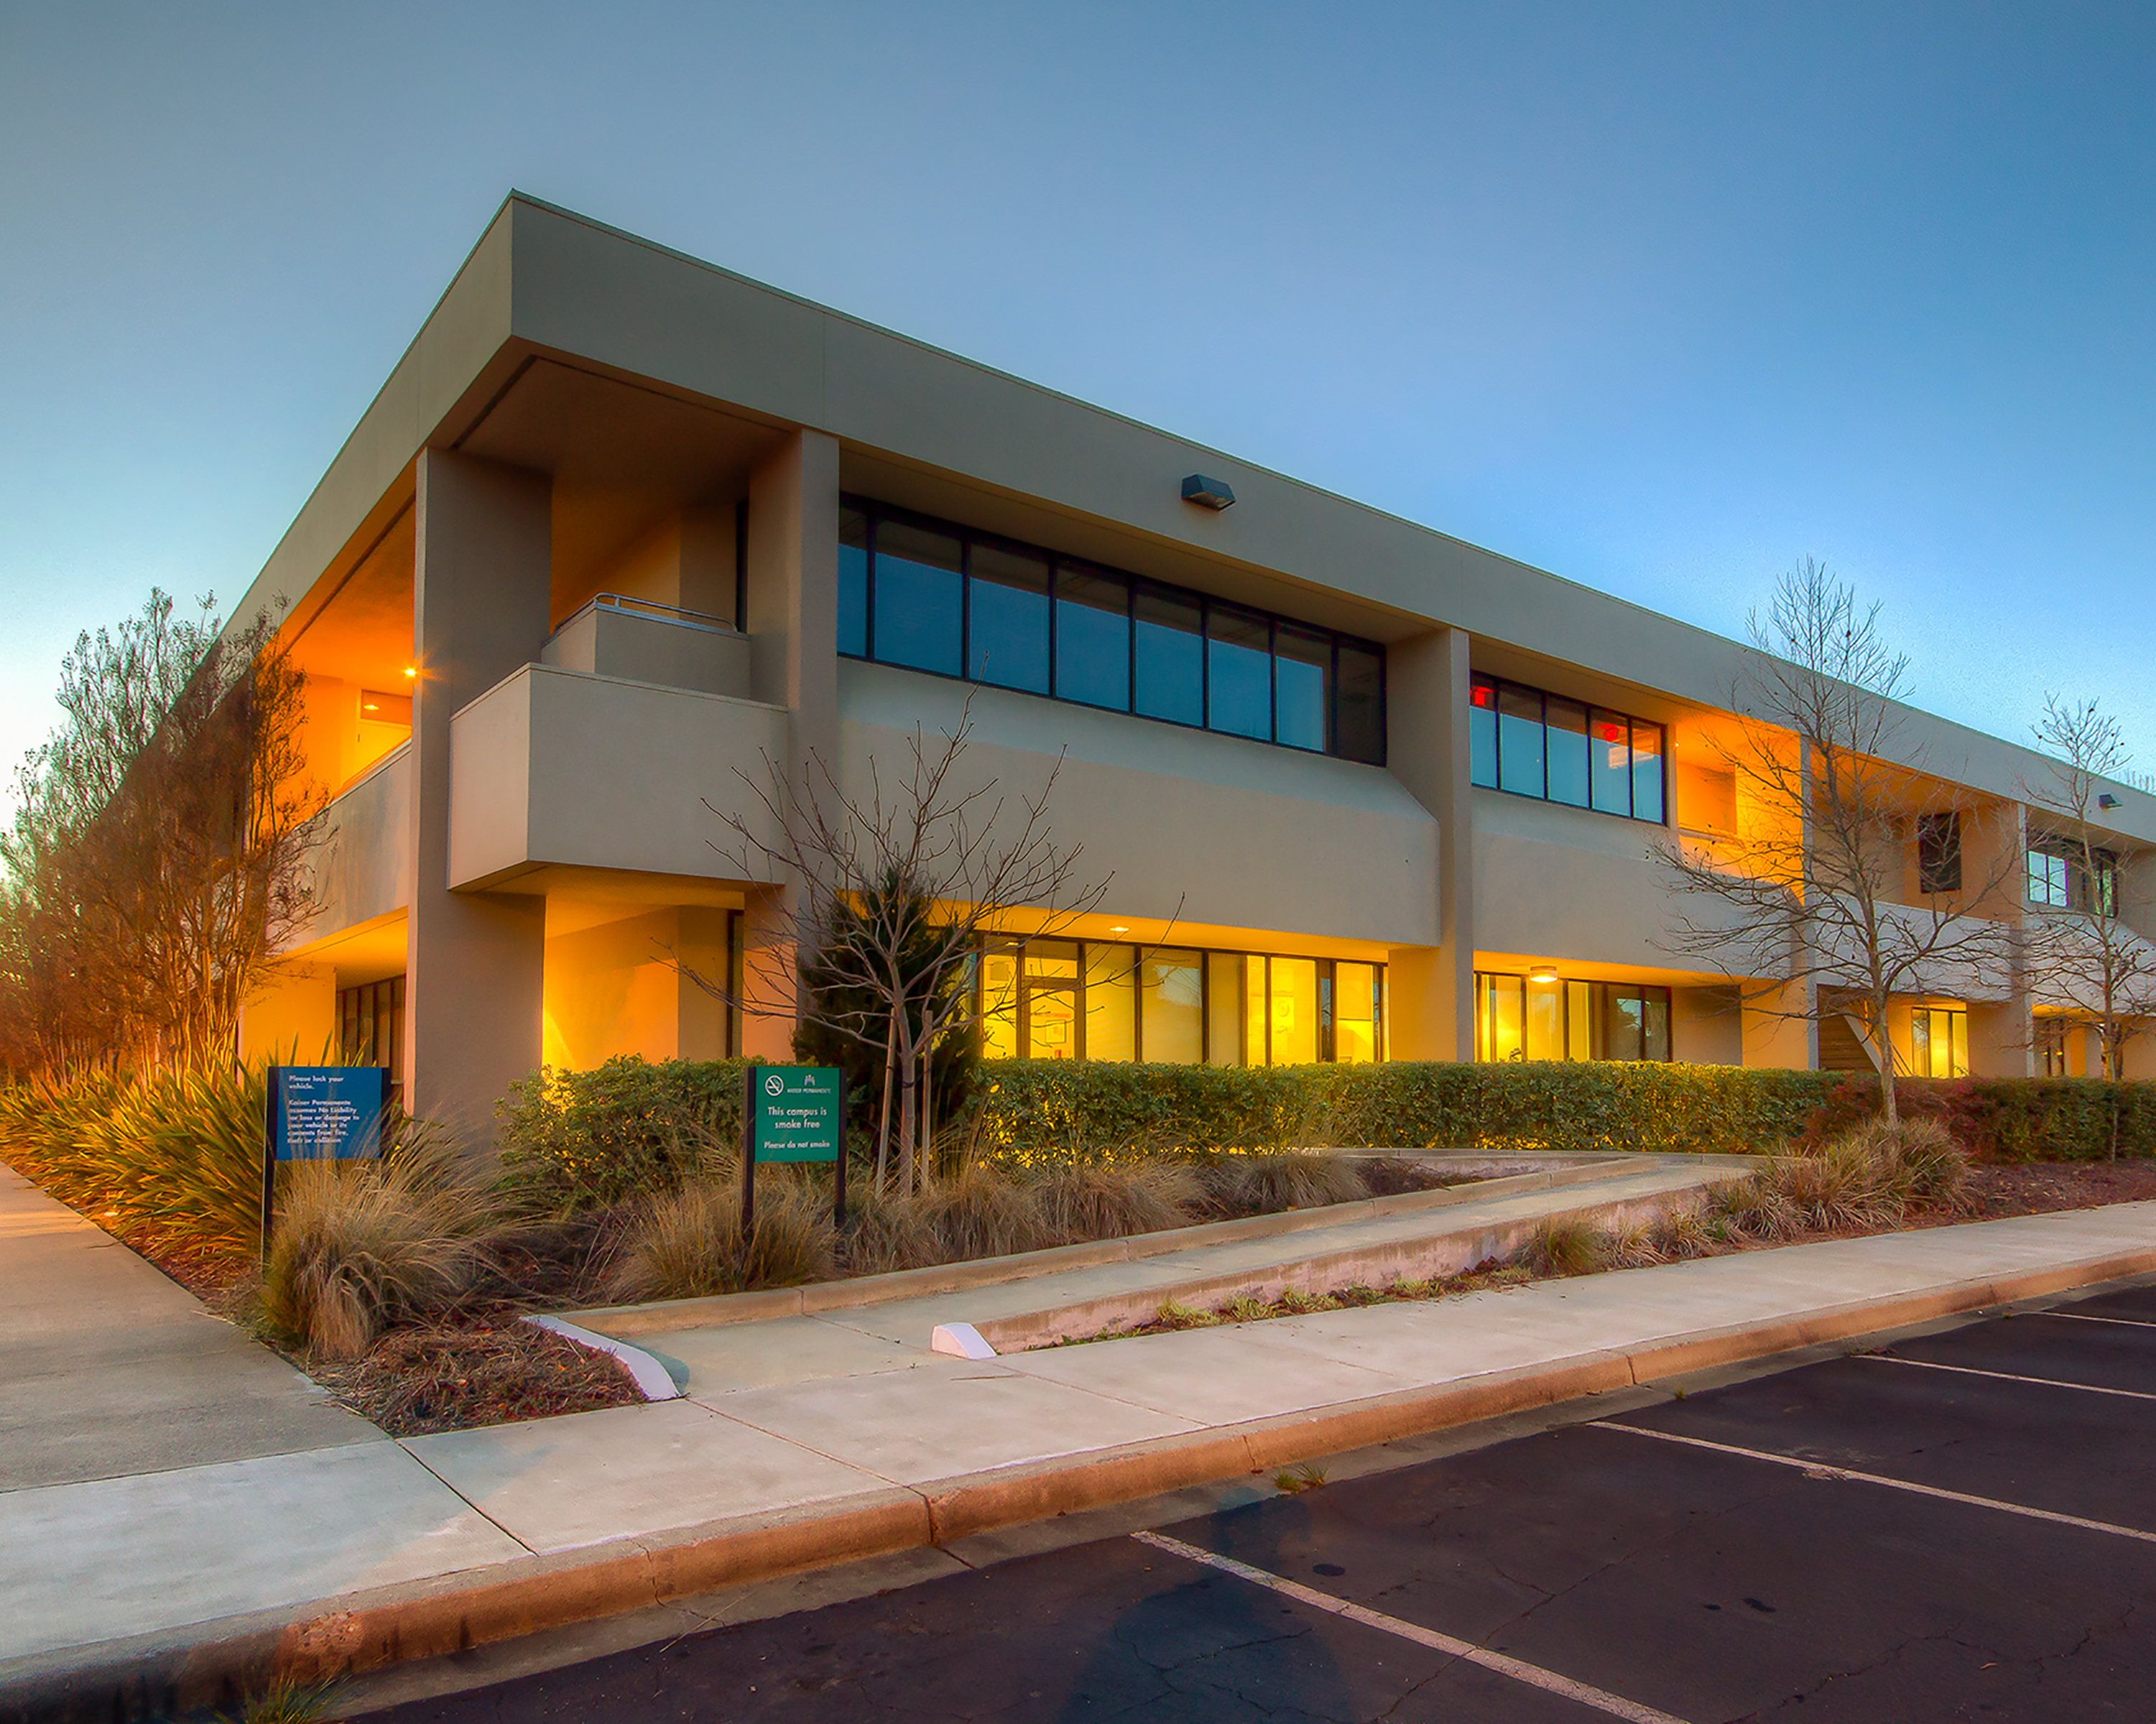 The 72,000 square foot Rohnert Park Medical Office Building began life as a general office building but got a $6 million makeover from Meridian. Photo courtesy of Meridian